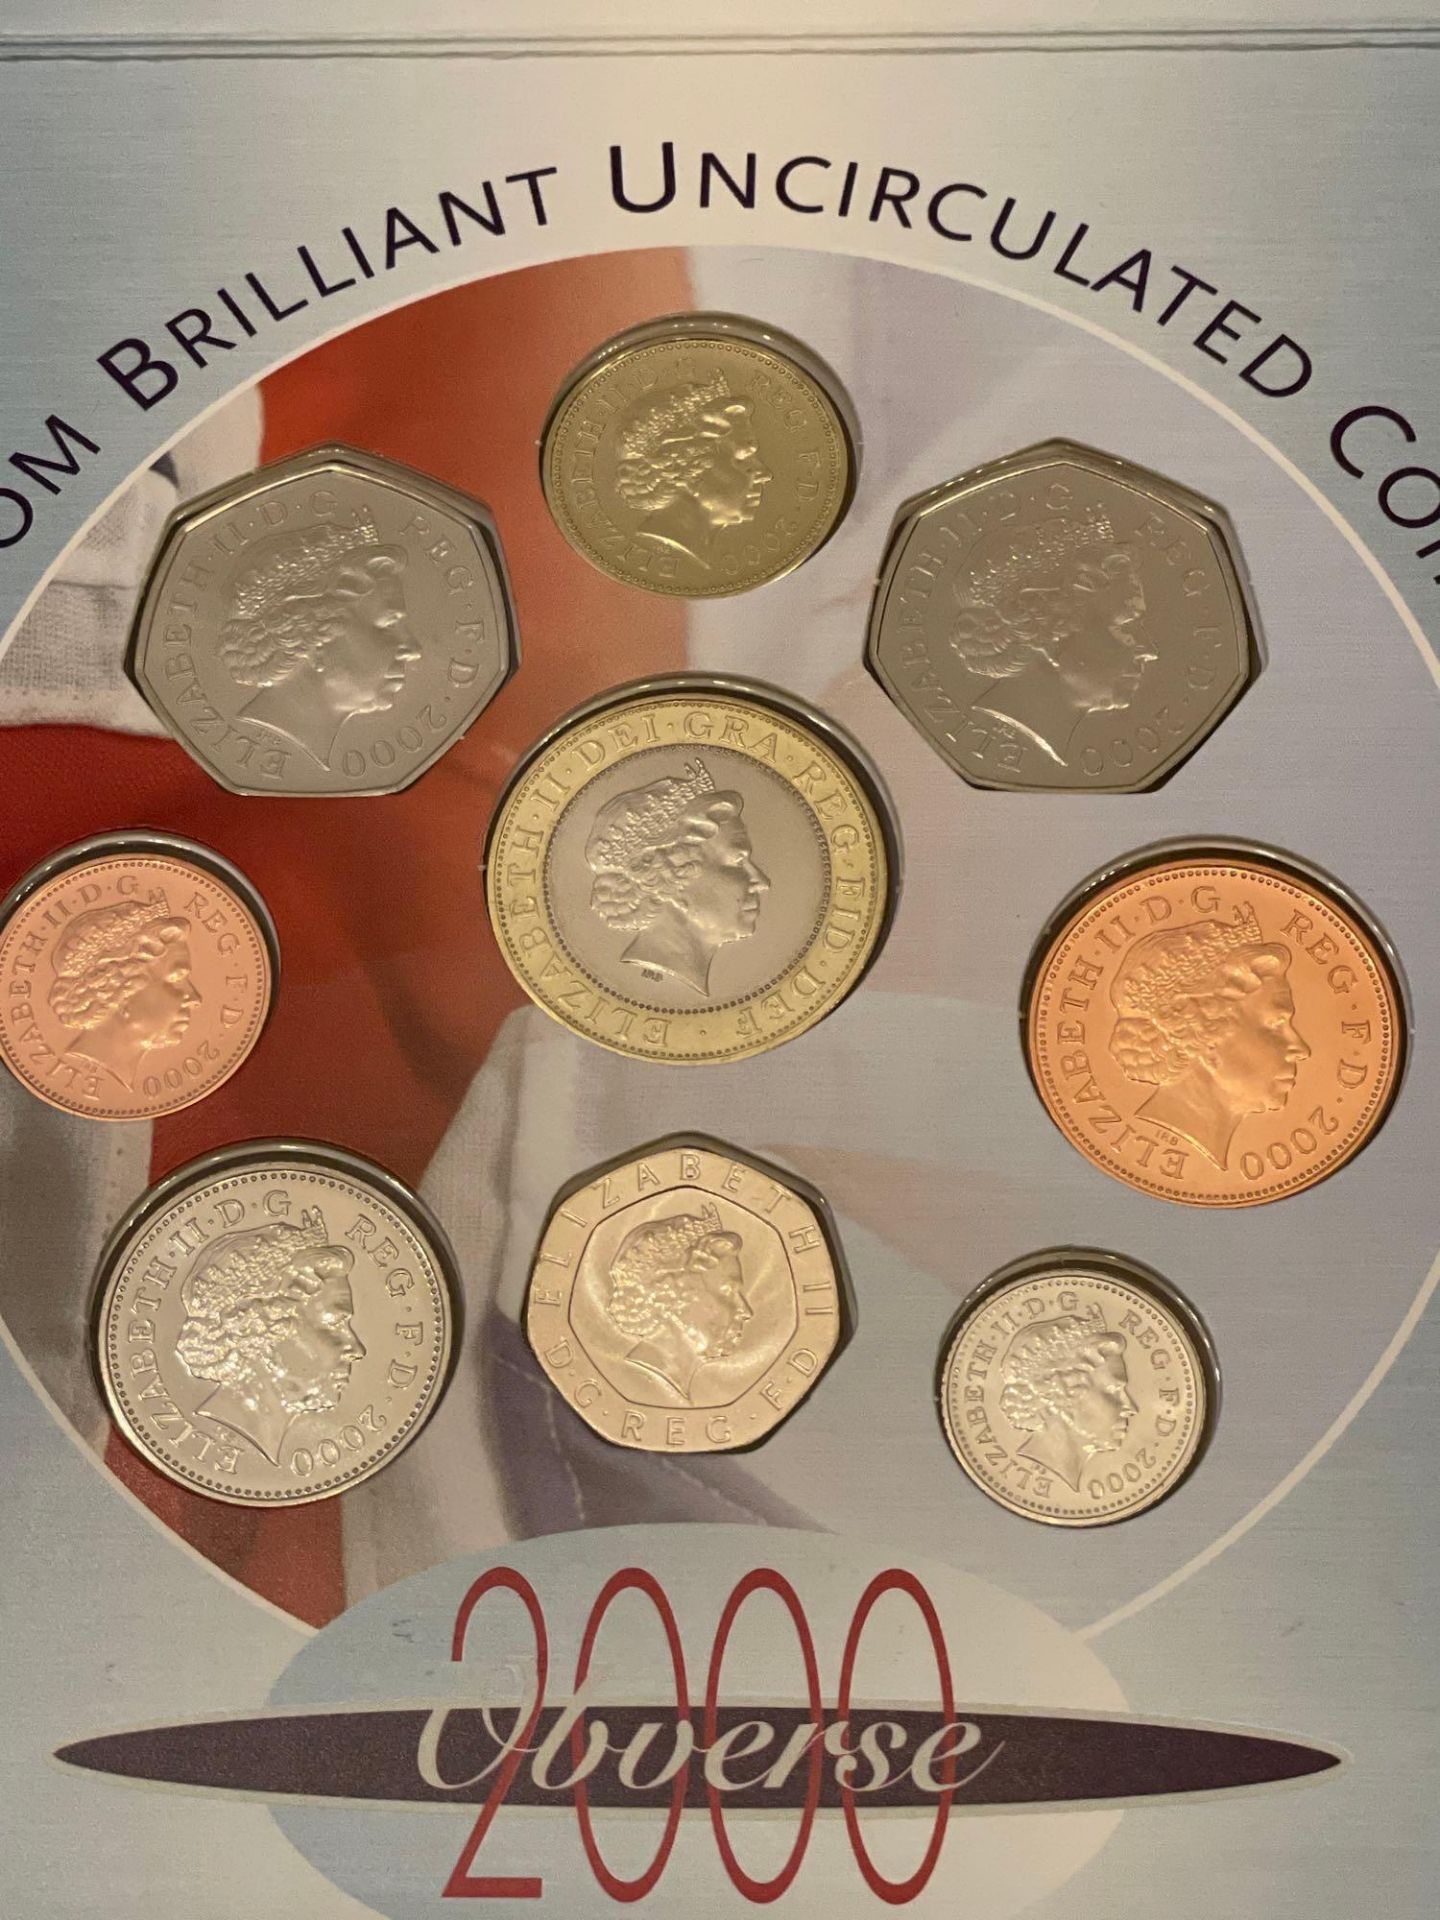 Britsh Uncirculated coin sets - Image 7 of 11